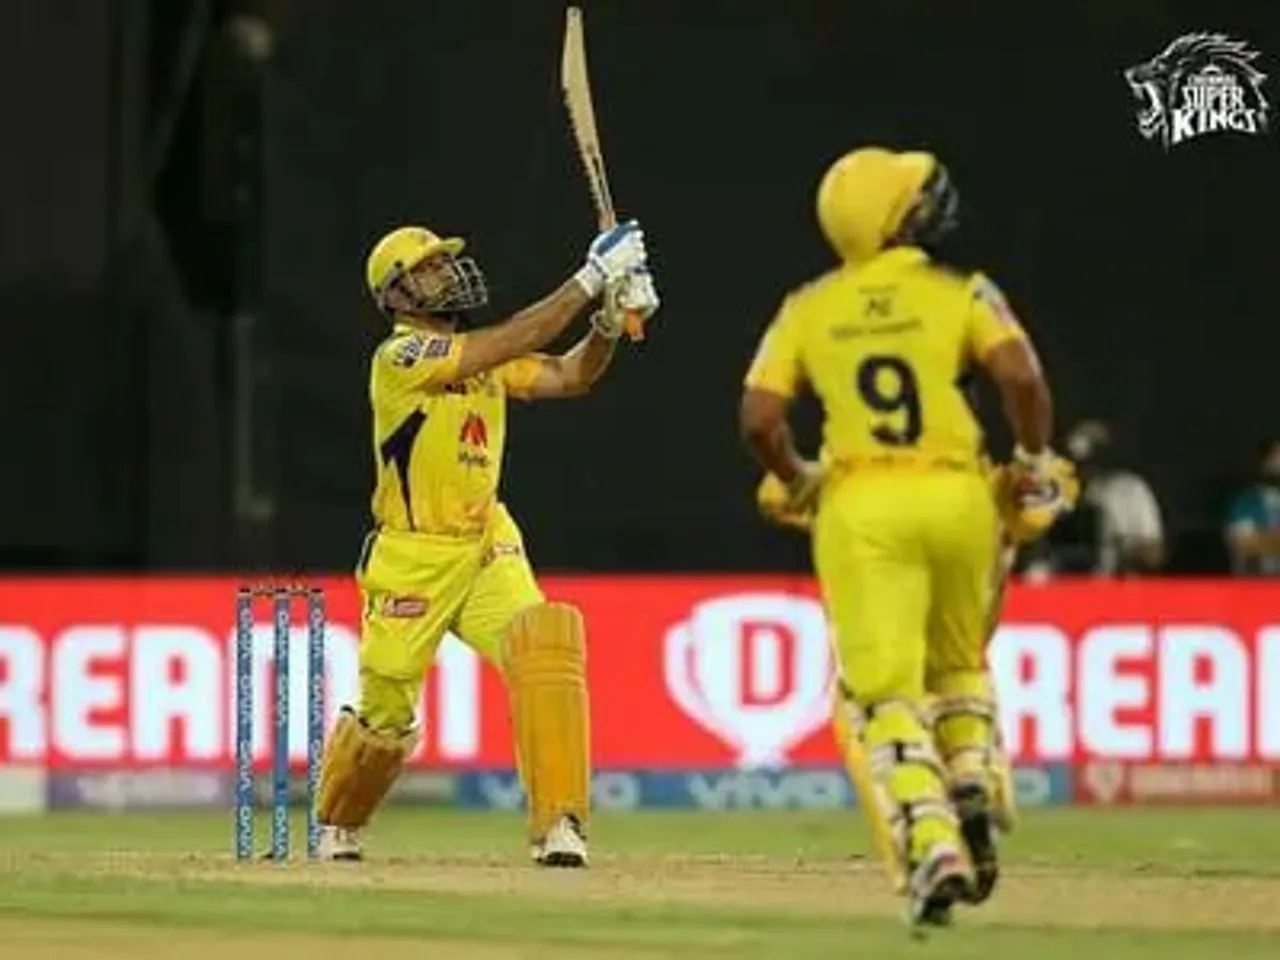 MS Dhoni finishes off in style vs SRH | IPL 2021 Points Table | SportzPoint.com